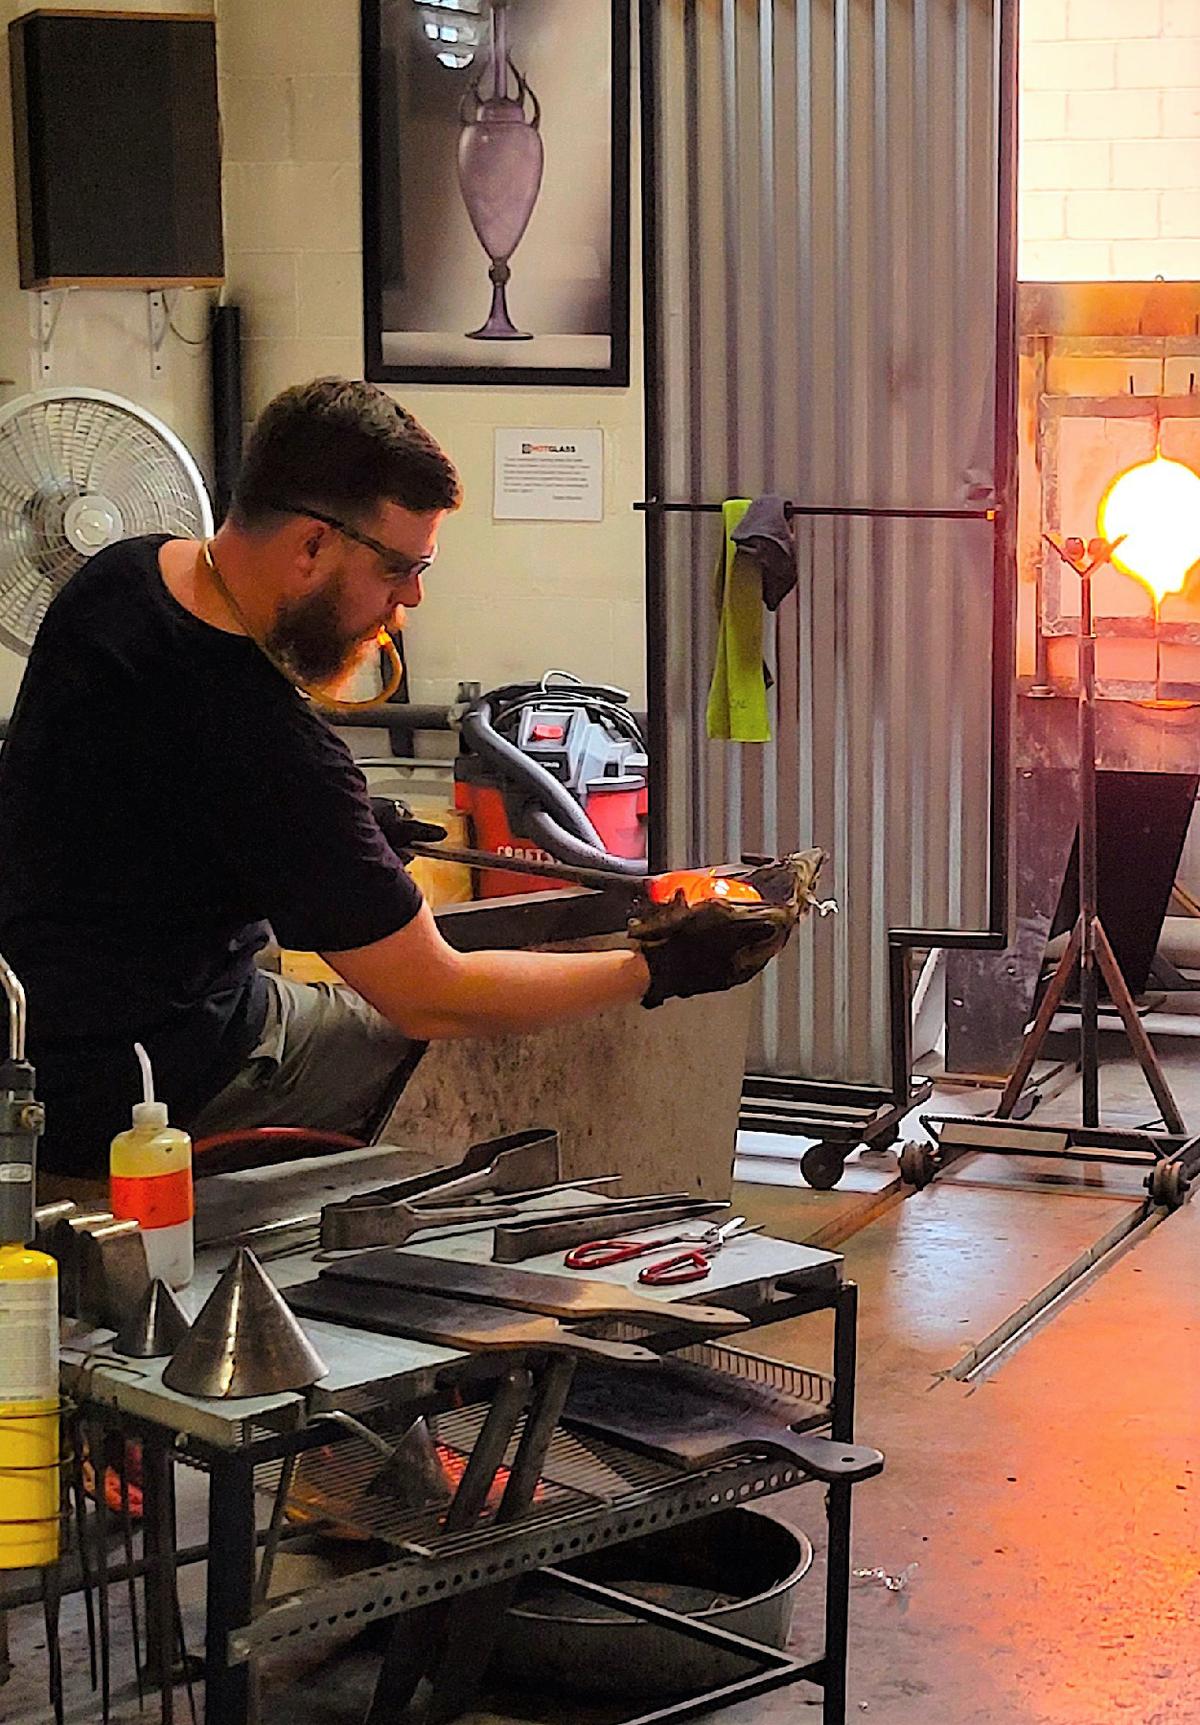 The focus at Hot Glass Inc. in Davenport, Iowa, is teaching glass art to at-risk children and veterans with PTSD. (Photo courtesy of Jim Farber)